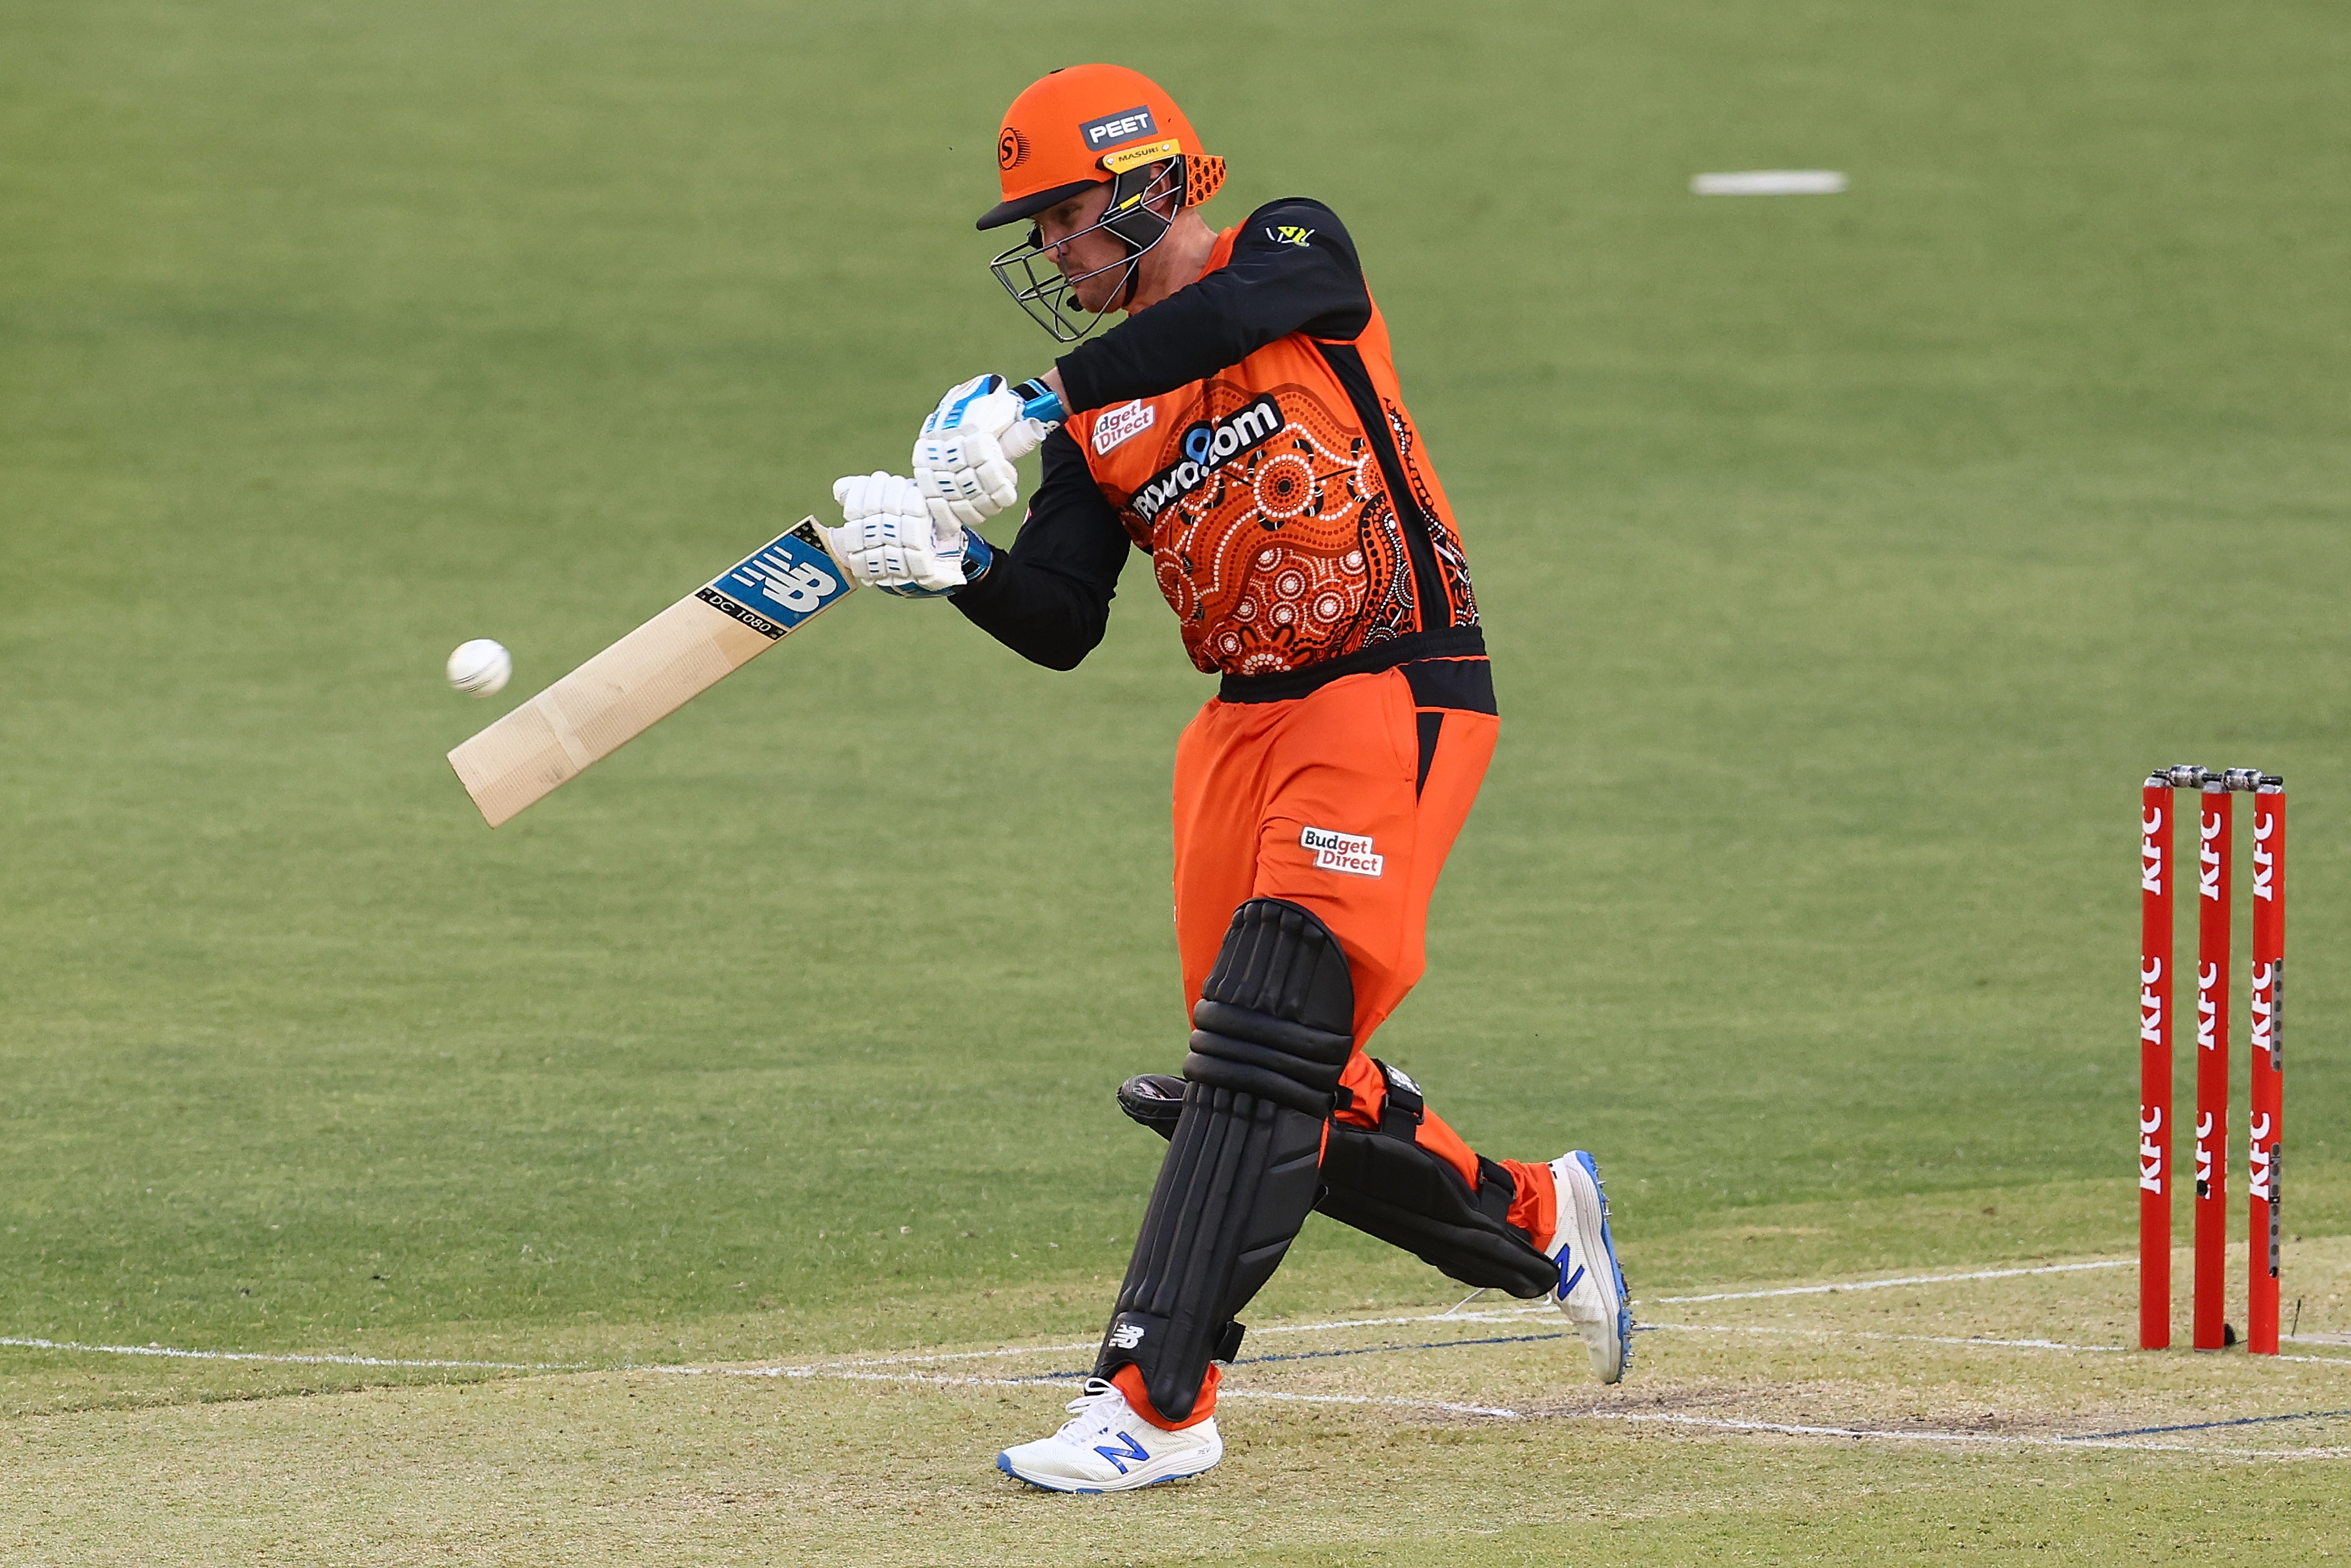 BBL 2021 | Jason Roy doubtful for BBL final with an ankle injury